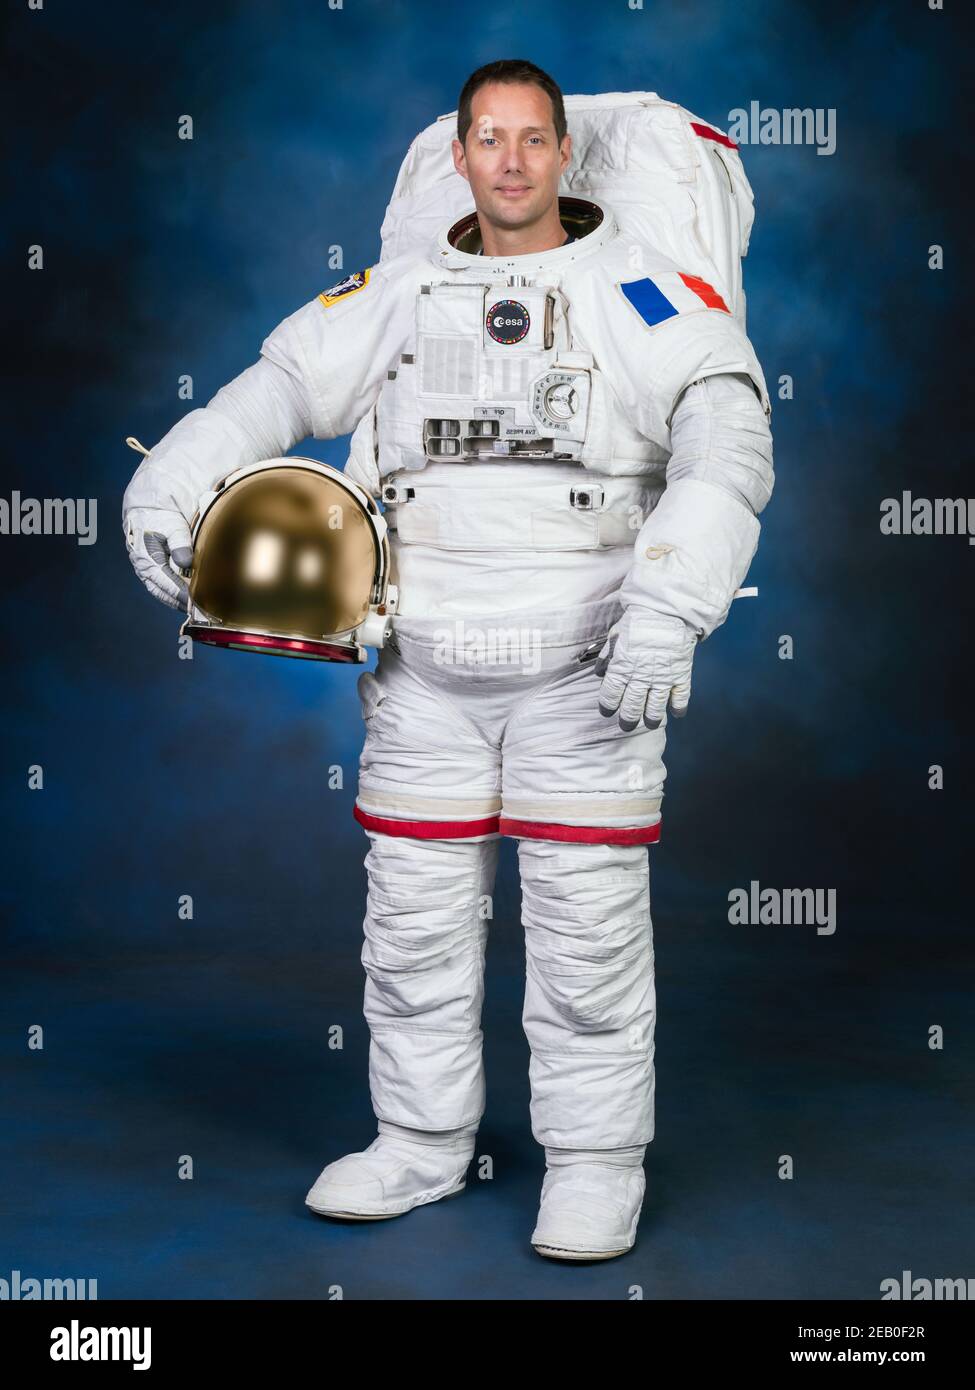 European Space Agency astronaut and SpaceX Crew-2 Mission Specialist Thomas Pesquet portrait in his NASA EVA Space Suit at the Johnson Space Center December 8, 2020 in Houston, Texas. Stock Photo